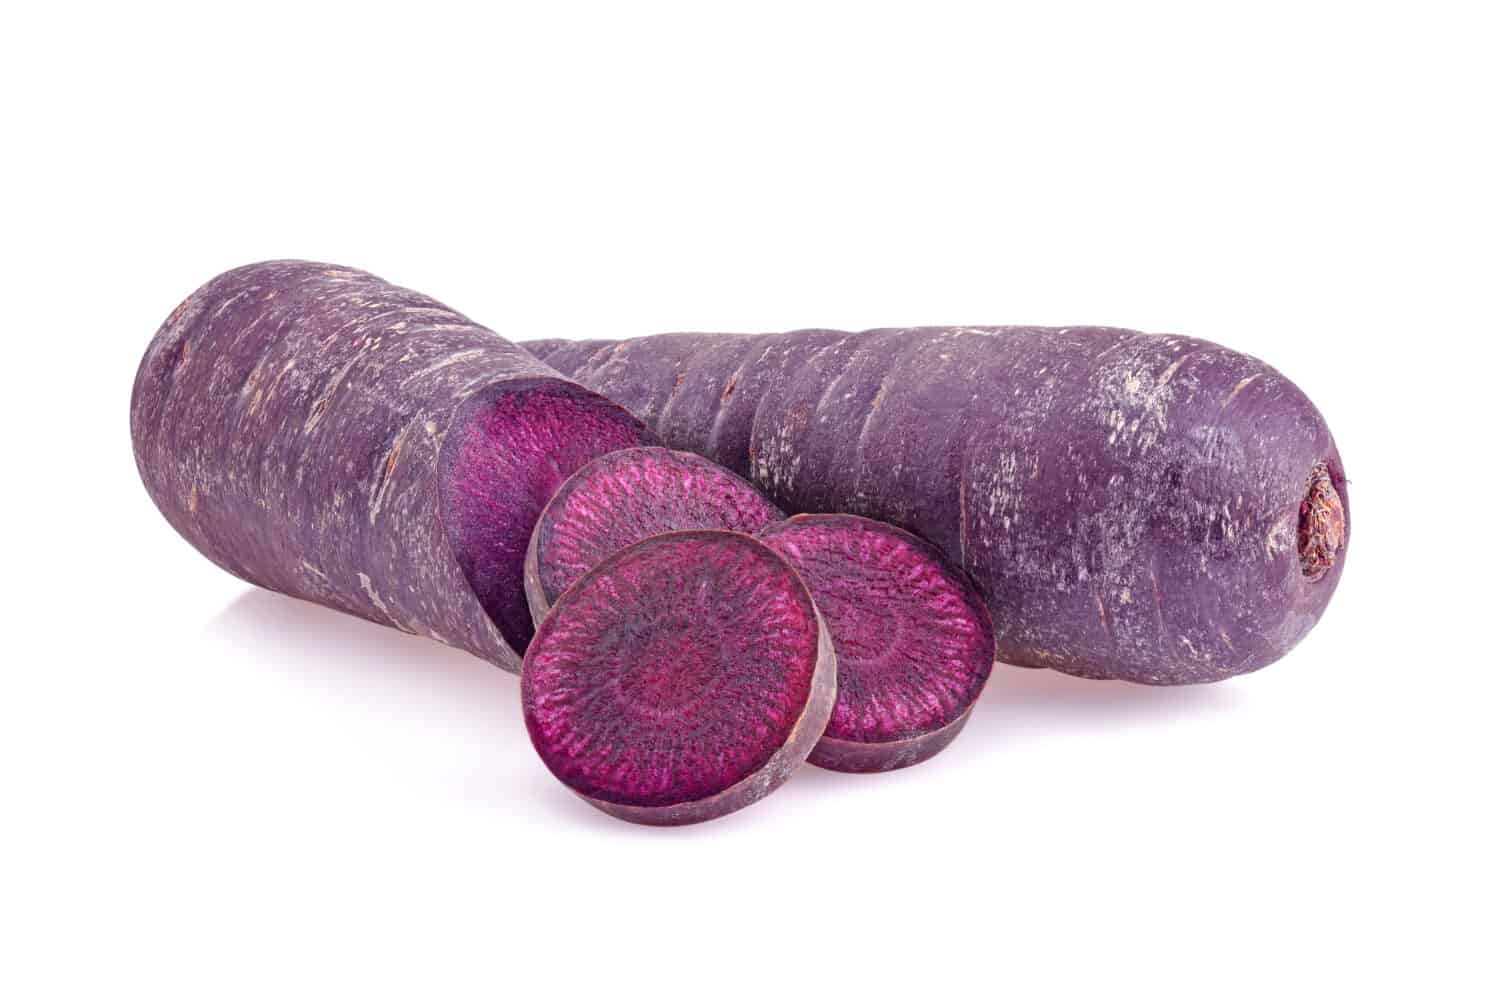 purple carrot isolated on white background